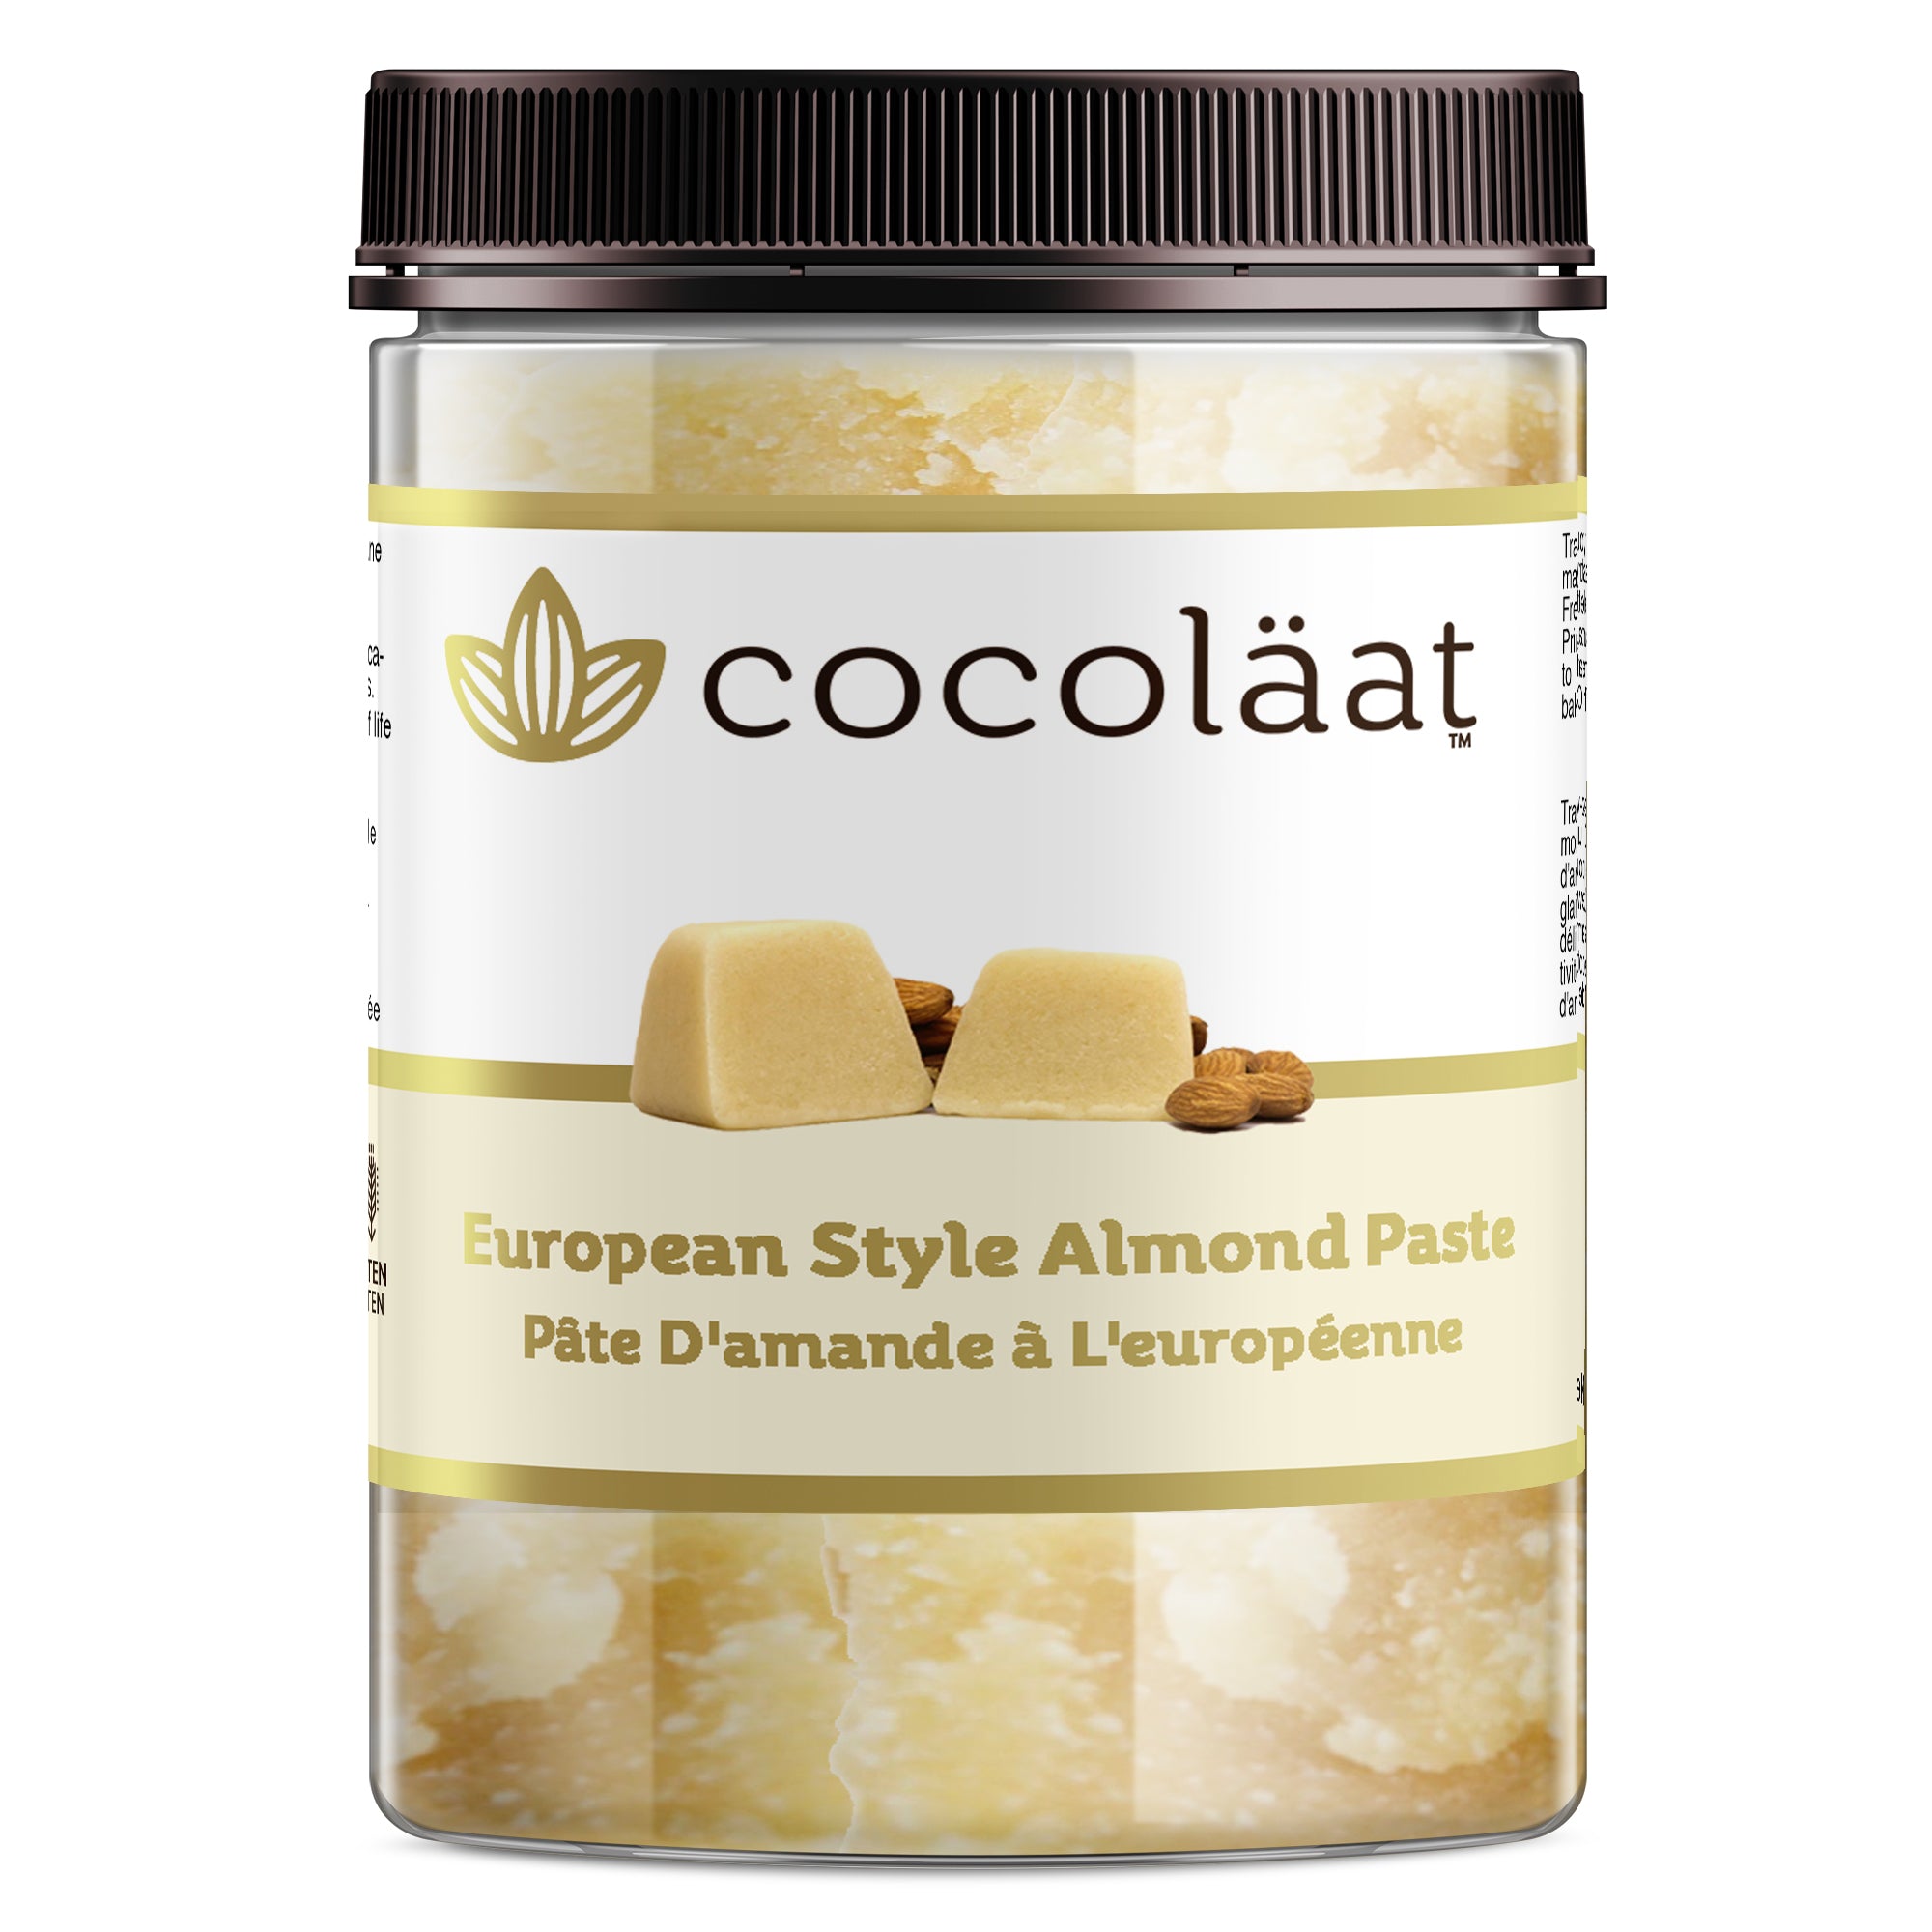 Cocoläat European Style Almond Paste | Sweetened For Flavouring & Pastry Filling | Premium California Almonds | 10 oz/284 g Resealable Jar